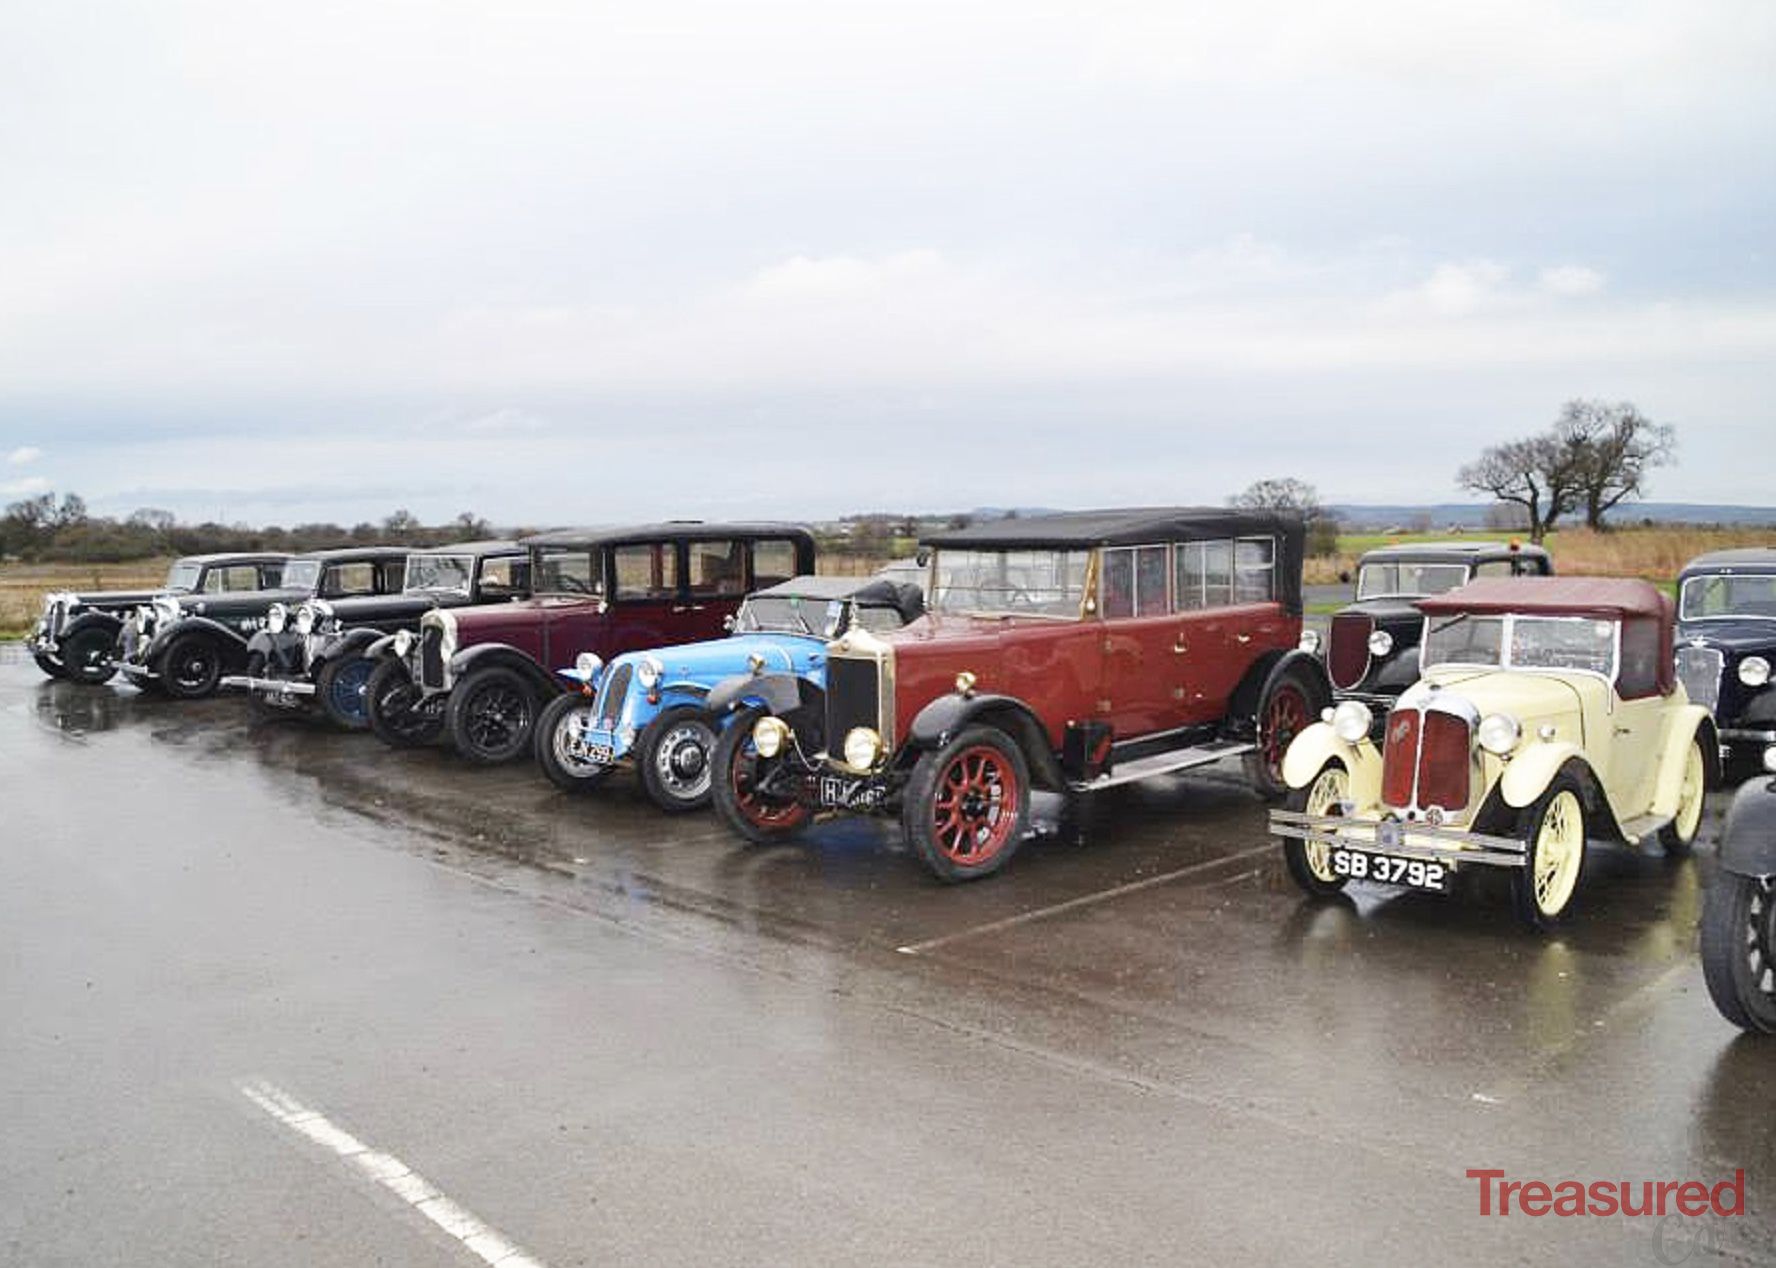 Chester Vintage Enthusiasts’ Car